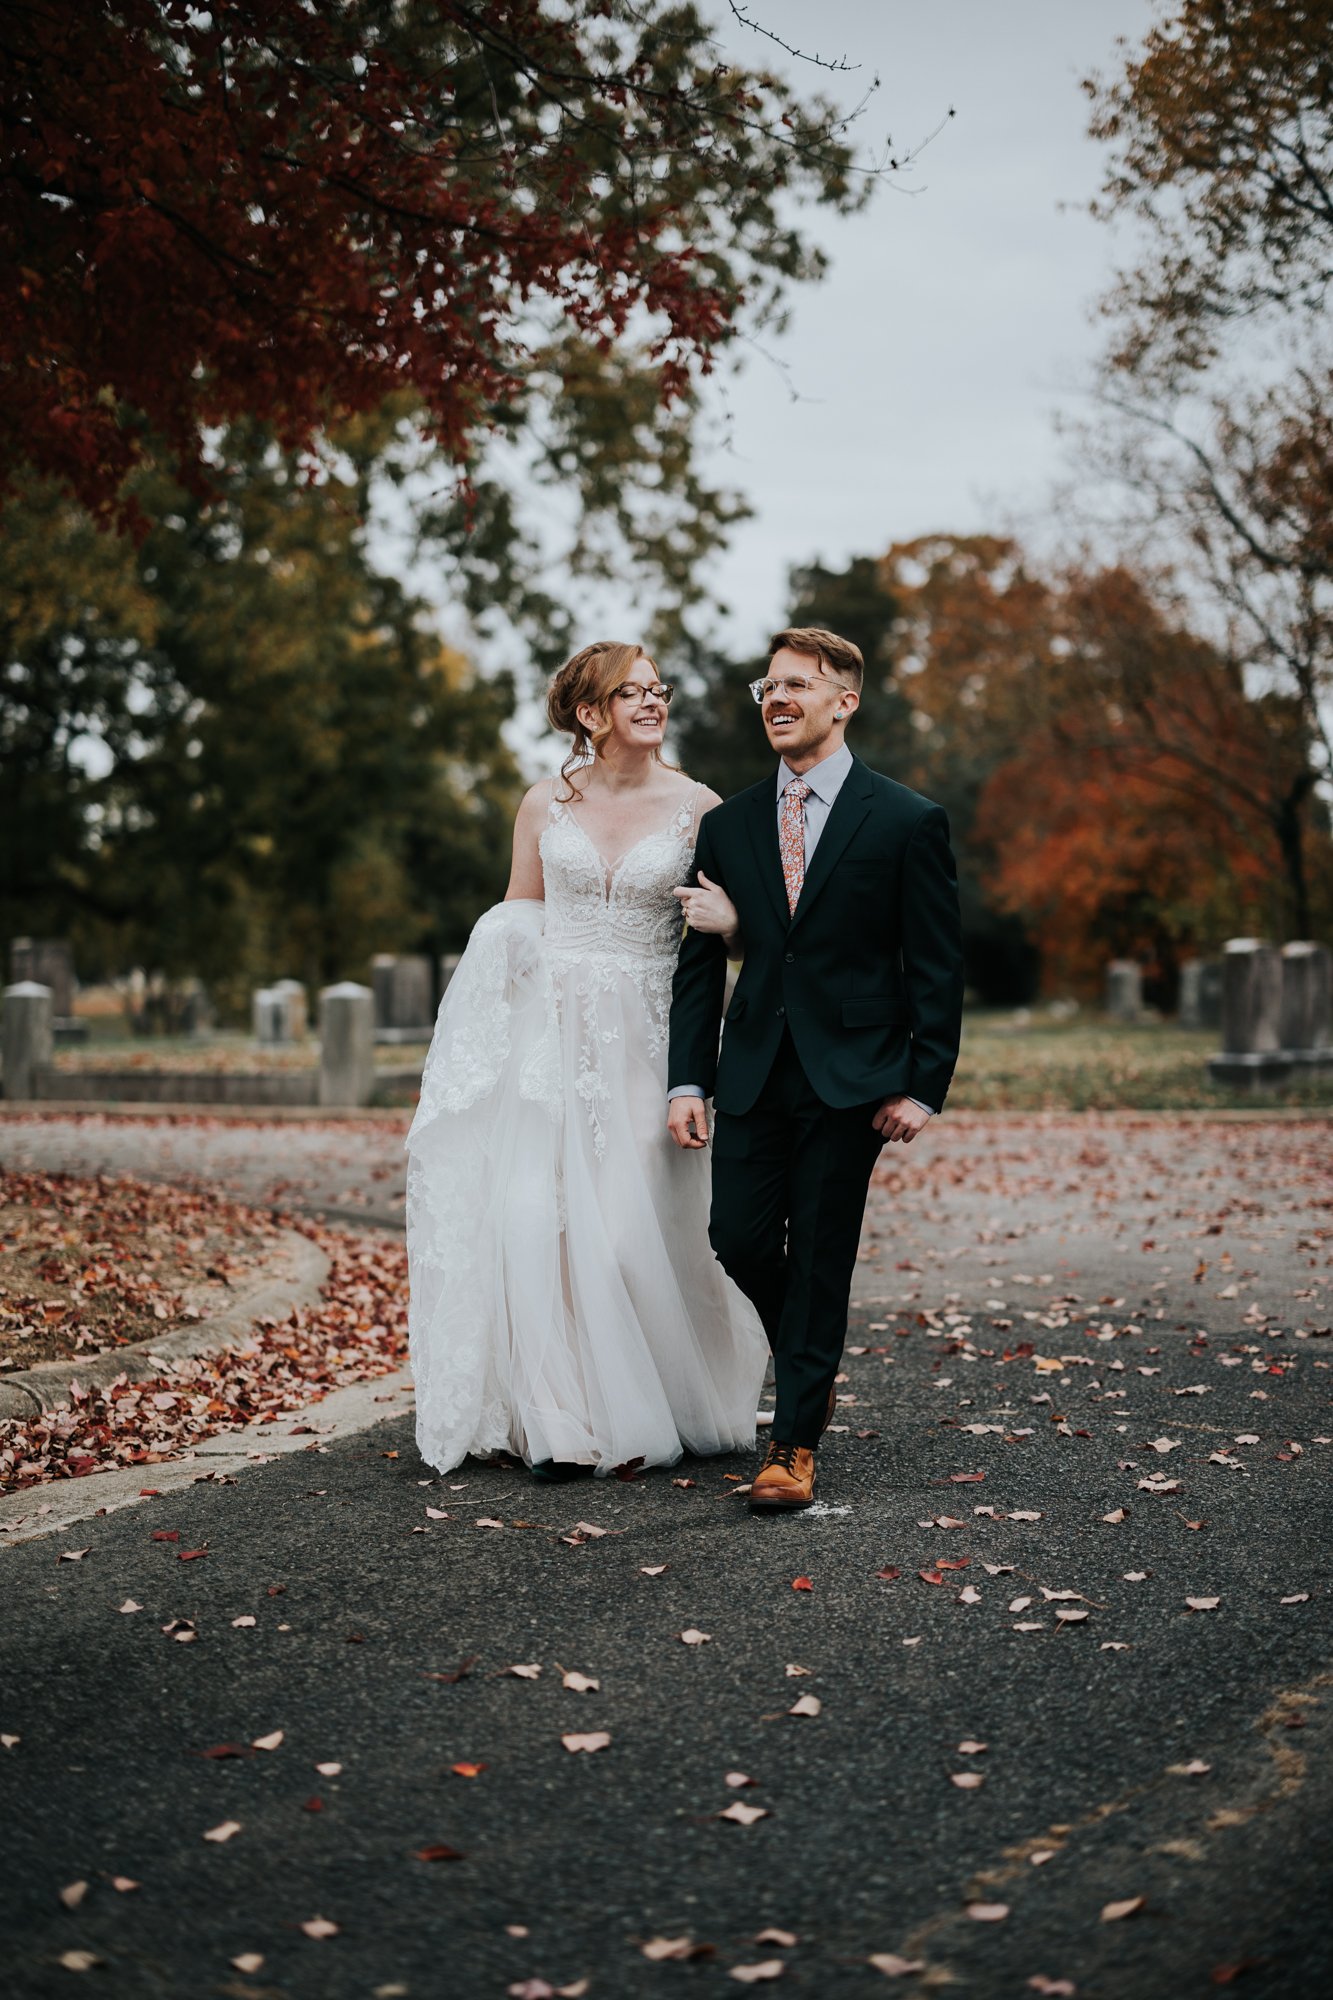 Couple gets married in cemetery - Durham, NC